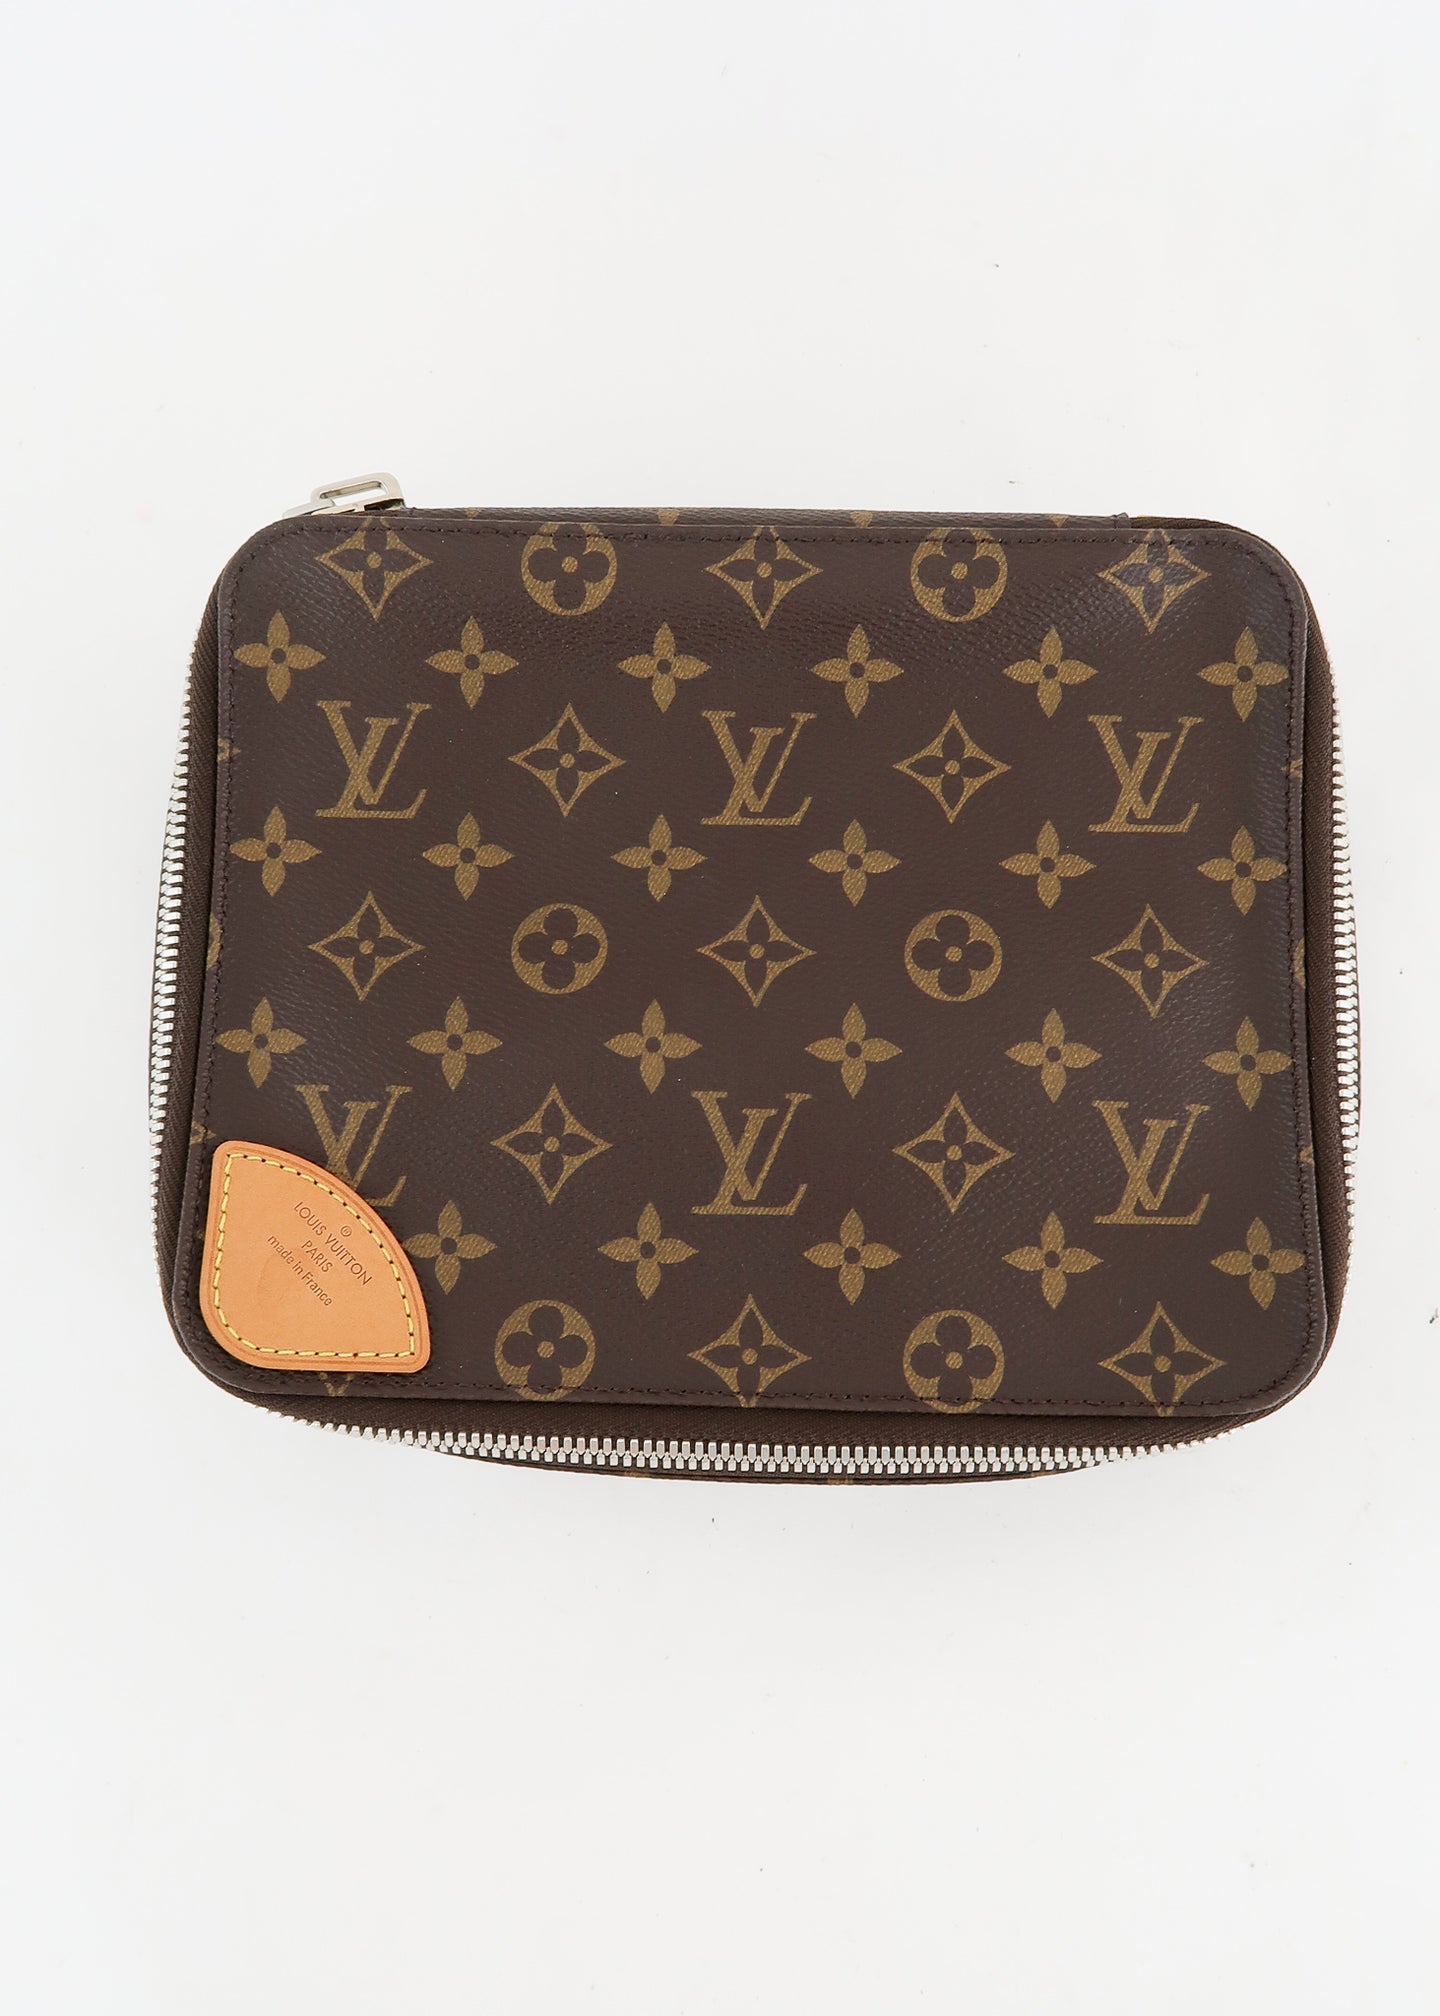 LOUIS VUITTON TRAVEL ACCESSORIES + HOW I PACK MY PACKING CUBE & COSMETIC BAG  